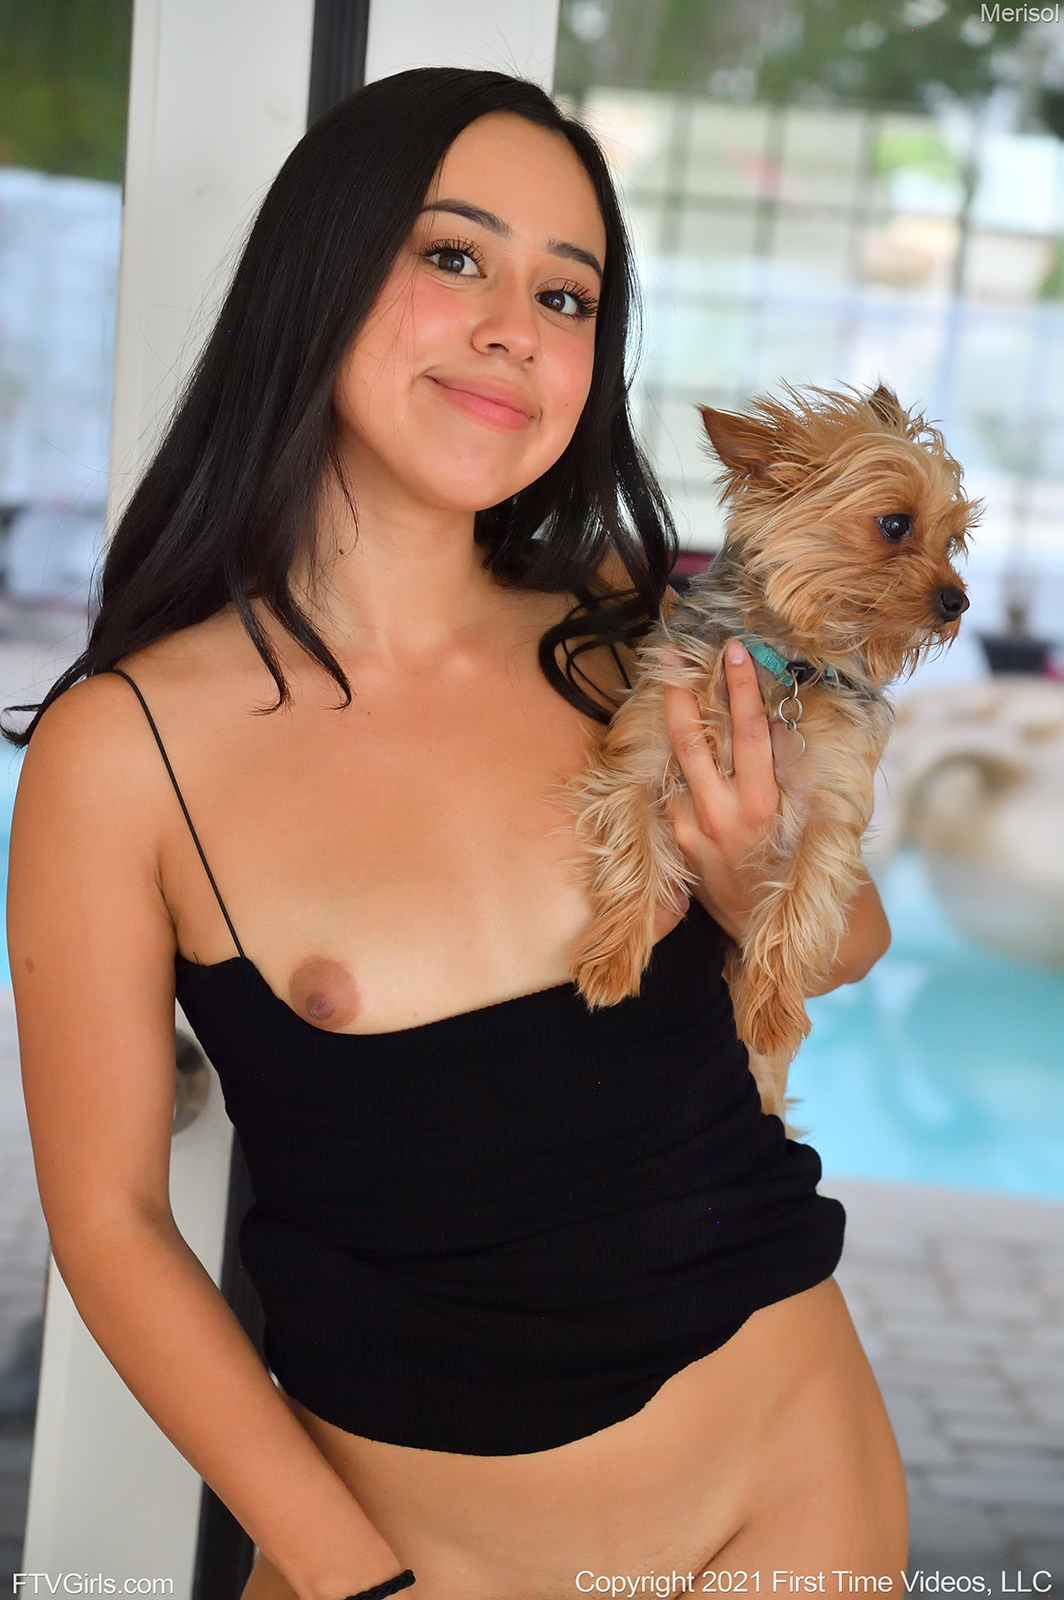 Merisol FTV cutely smile and is showing her small tits while holding a small furry puppy on her hands